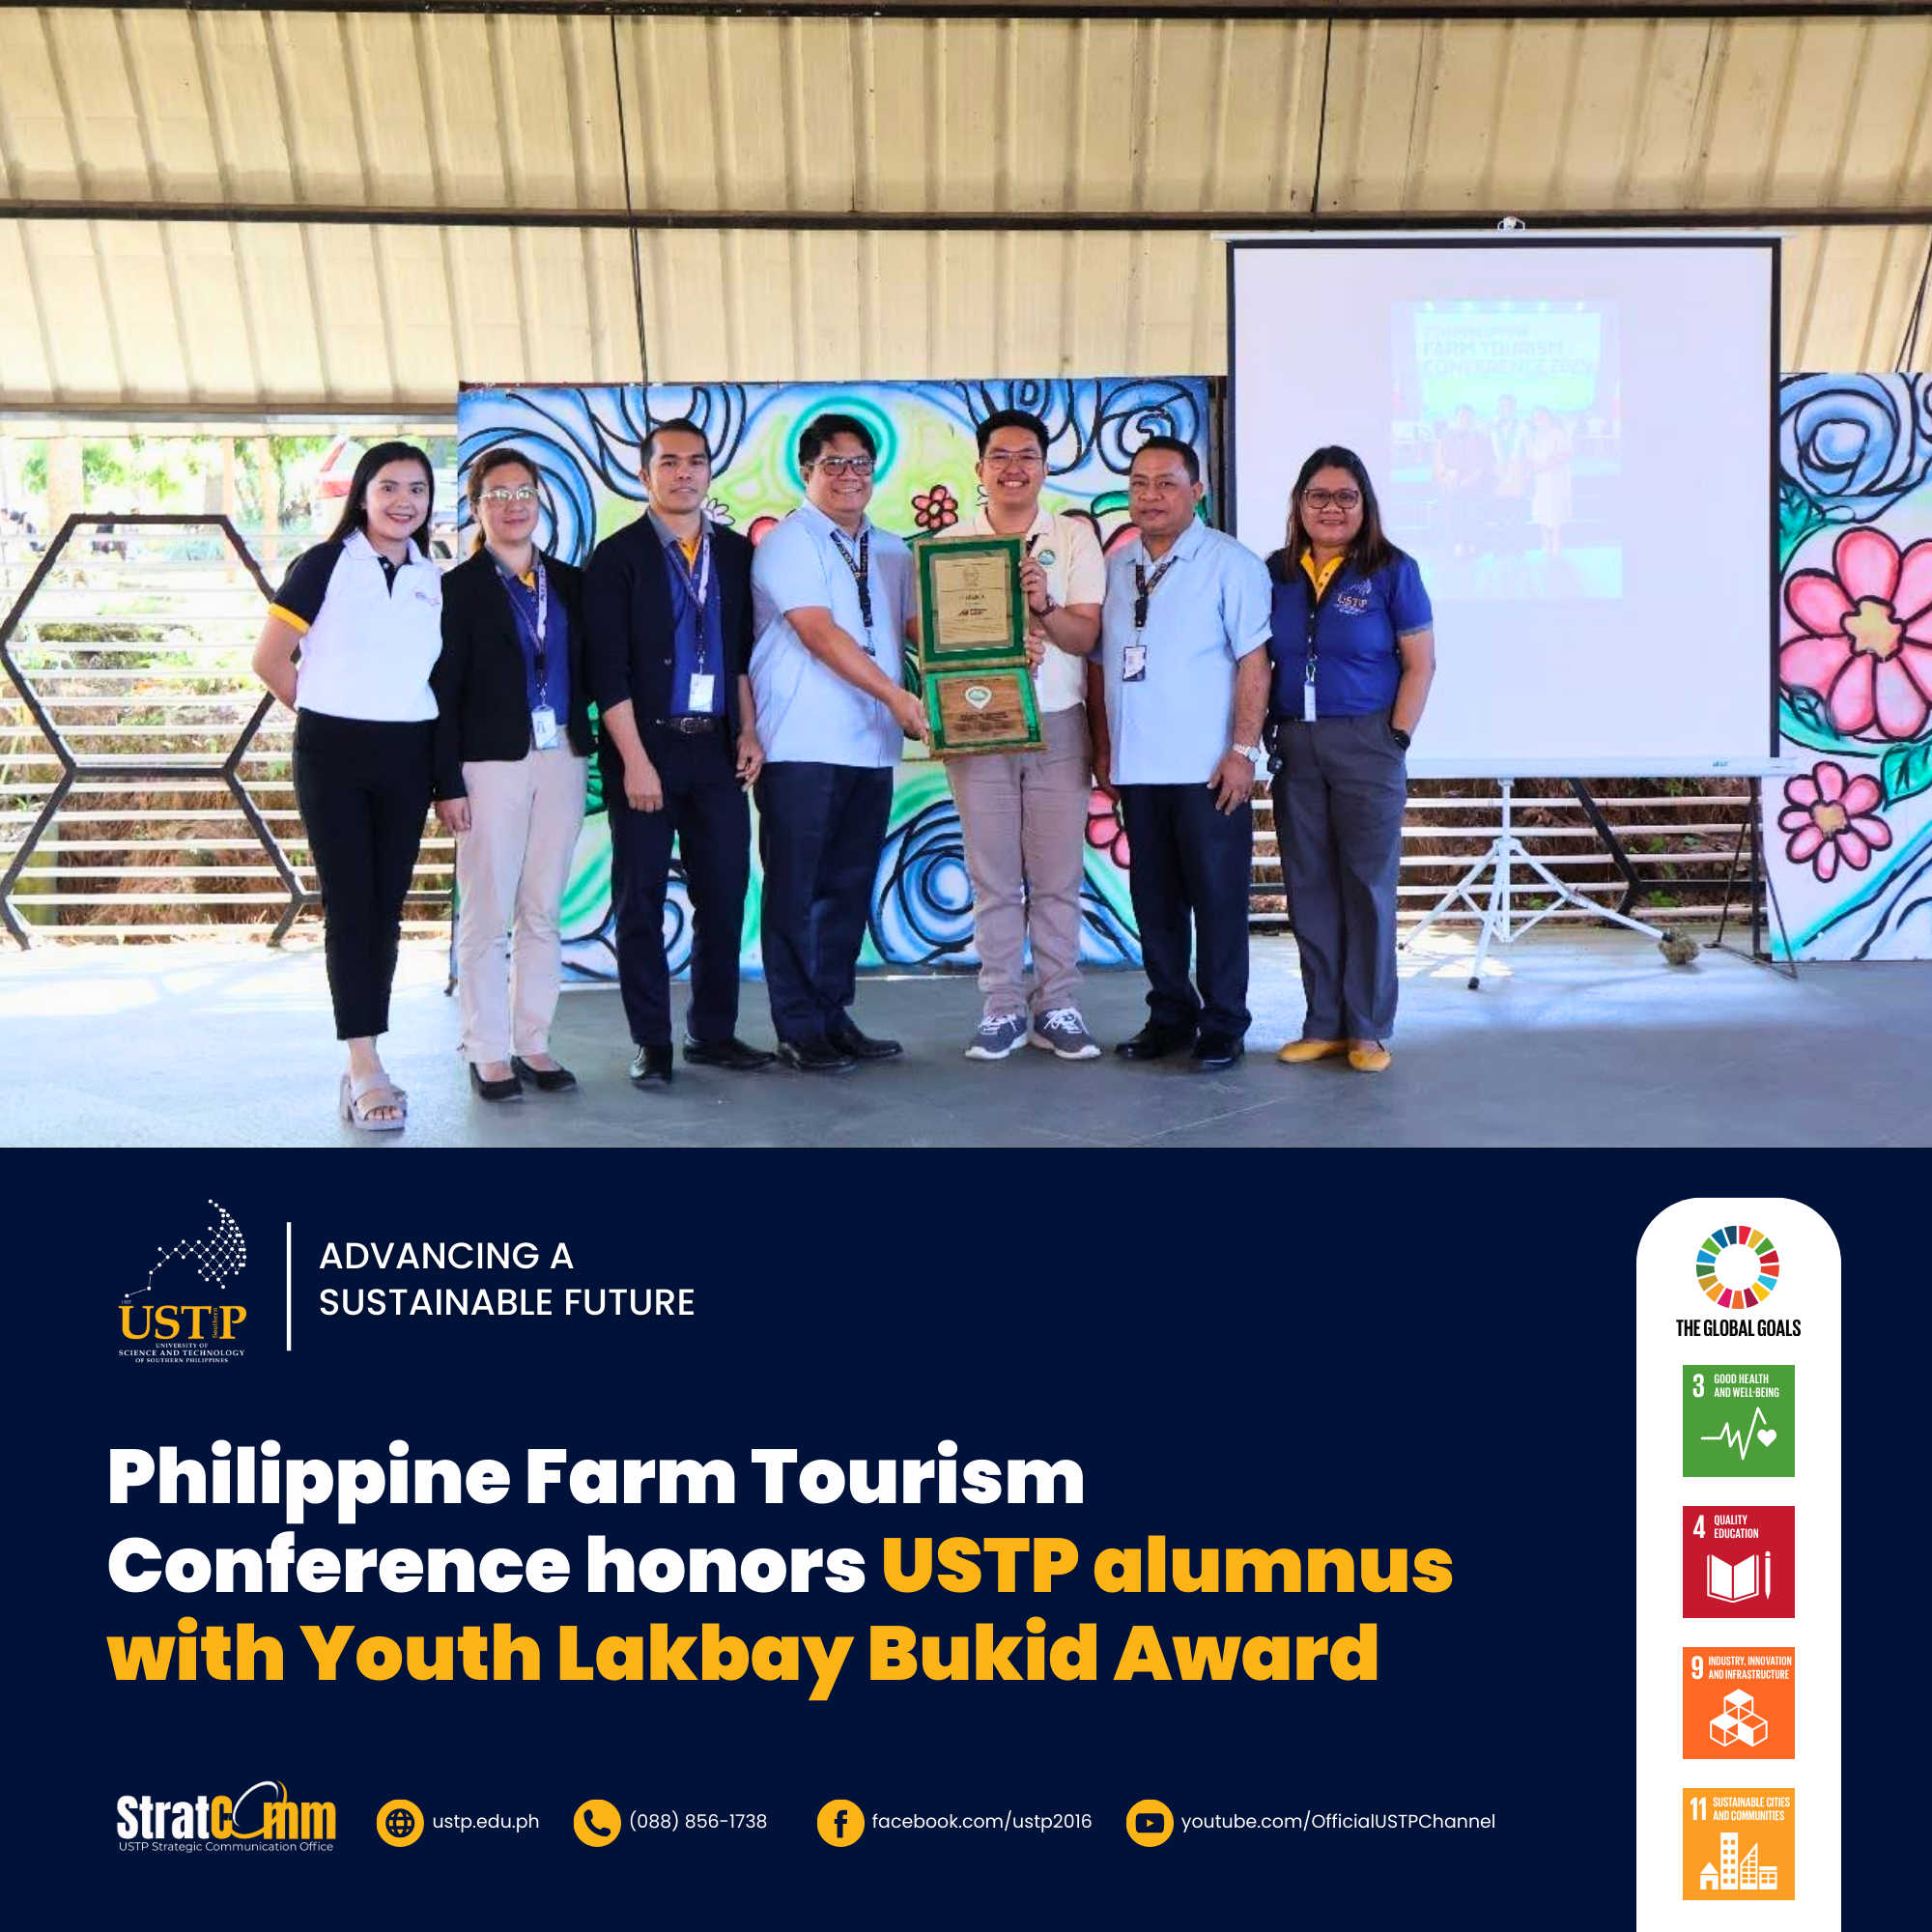 Philippine Farm Tourism Conference honors USTP alumnus with Youth Lakbay Bukid Award